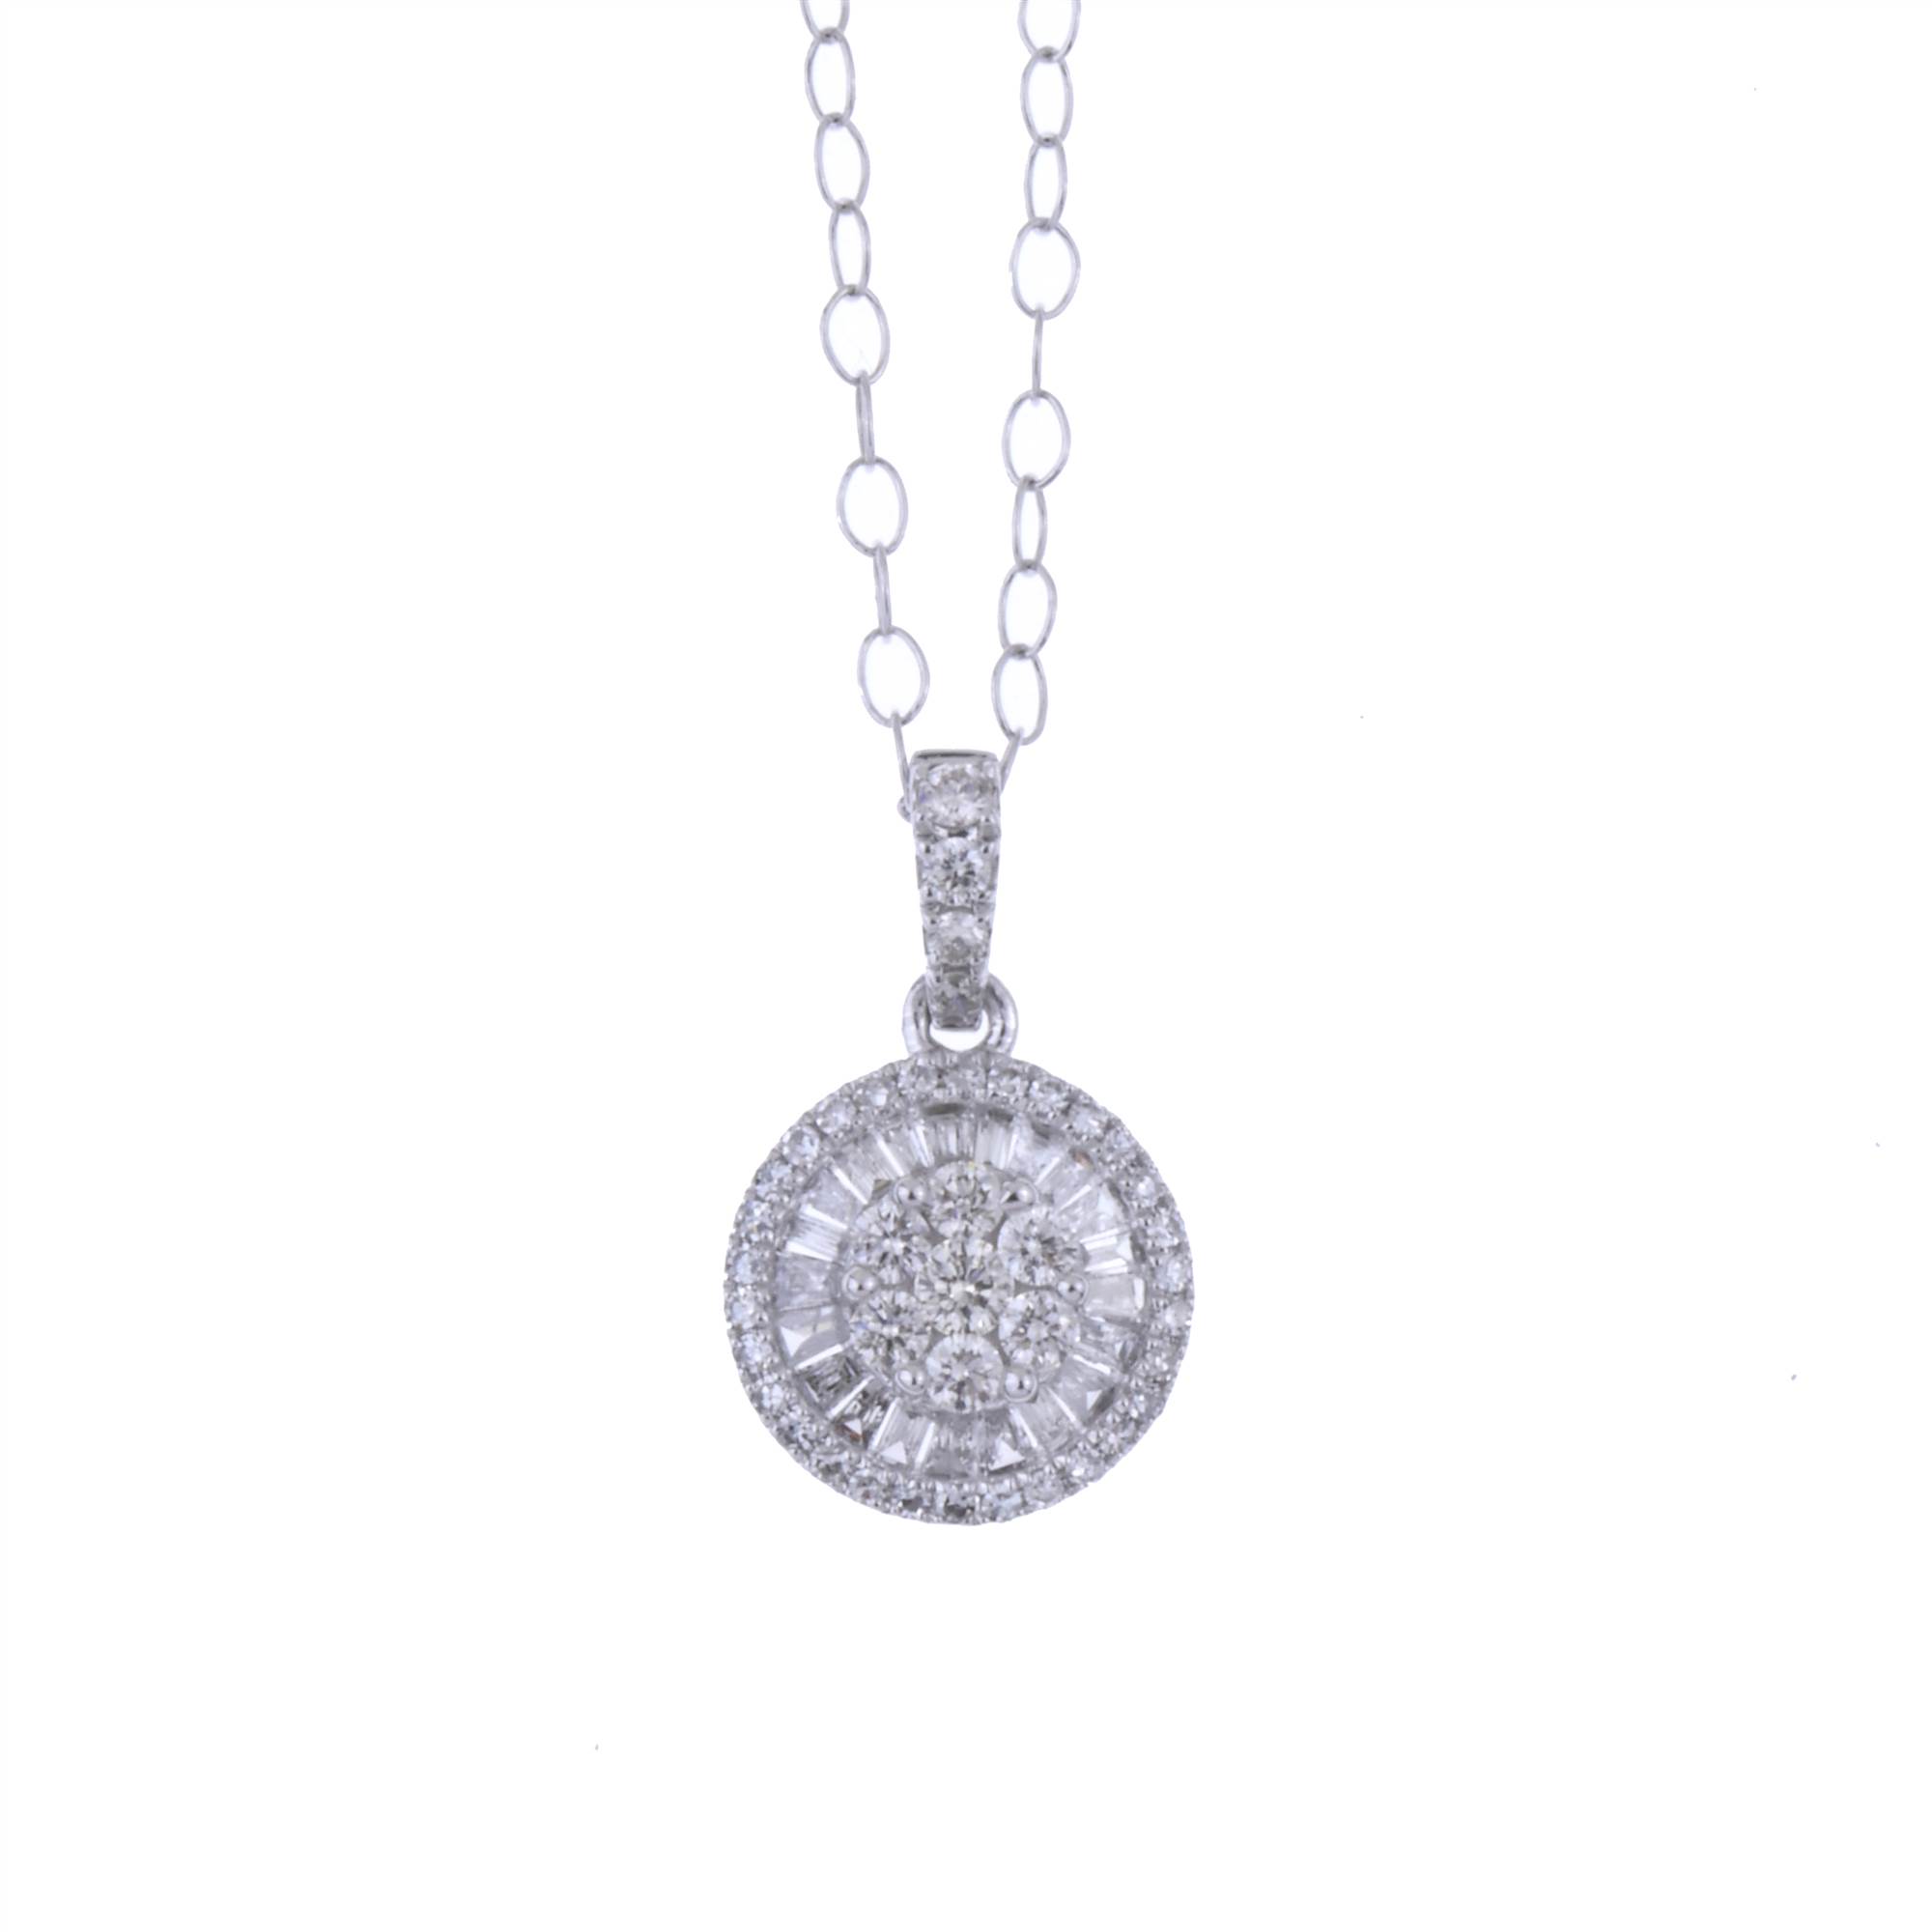 CHAIN WITH ROSETTE PENDANT IN WHITE GOLD AND DIAMONDS.